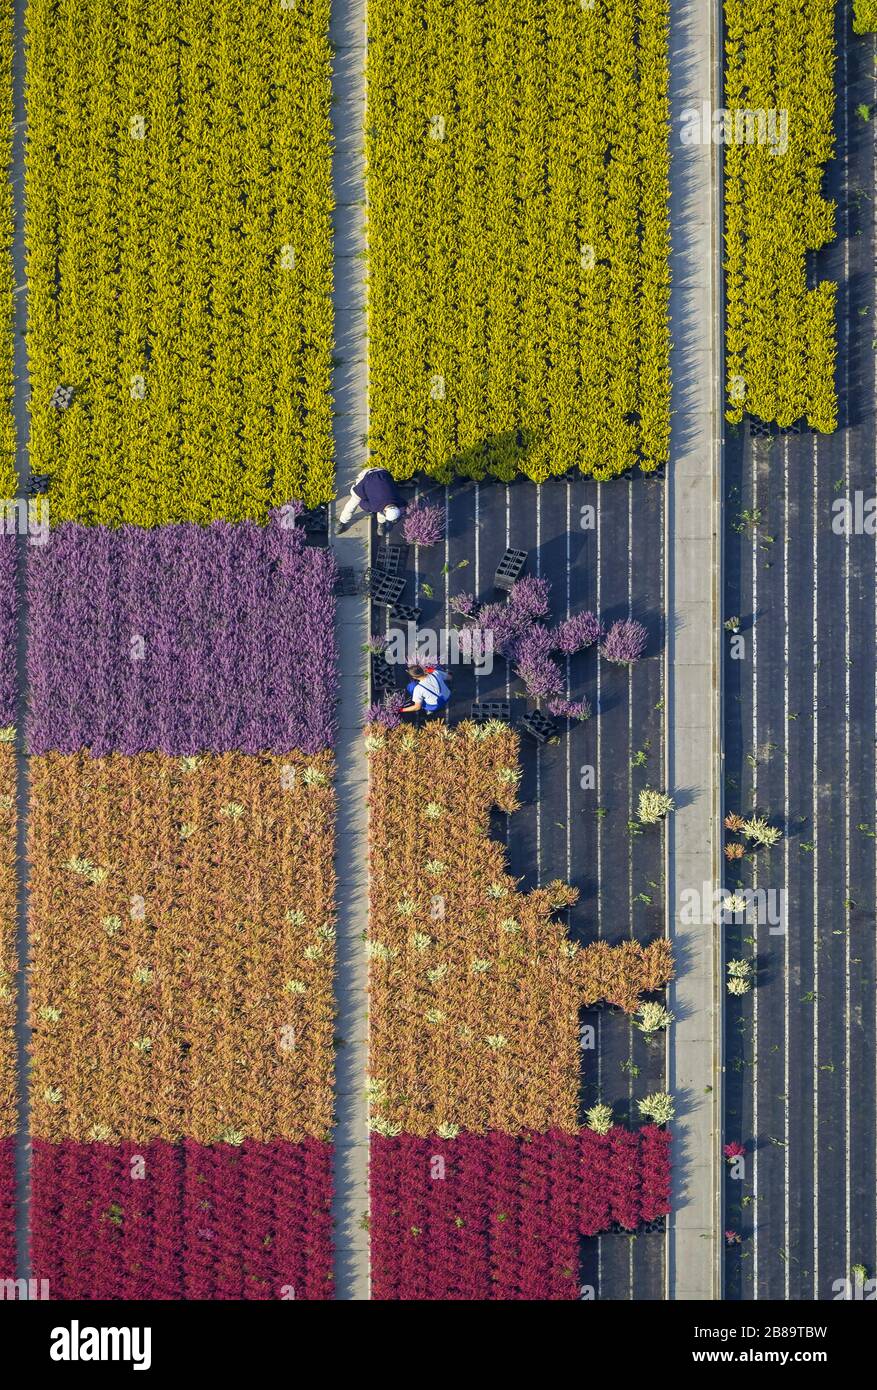 Common Heather, Ling, Heather (Calluna vulgaris), Rows of colorful flowers, fields in an ornamental plant operating in Schermbeck, 30.09.2013, aerial view,, Germany, North Rhine-Westphalia, Ruhr Area, Schermbeck Stock Photo